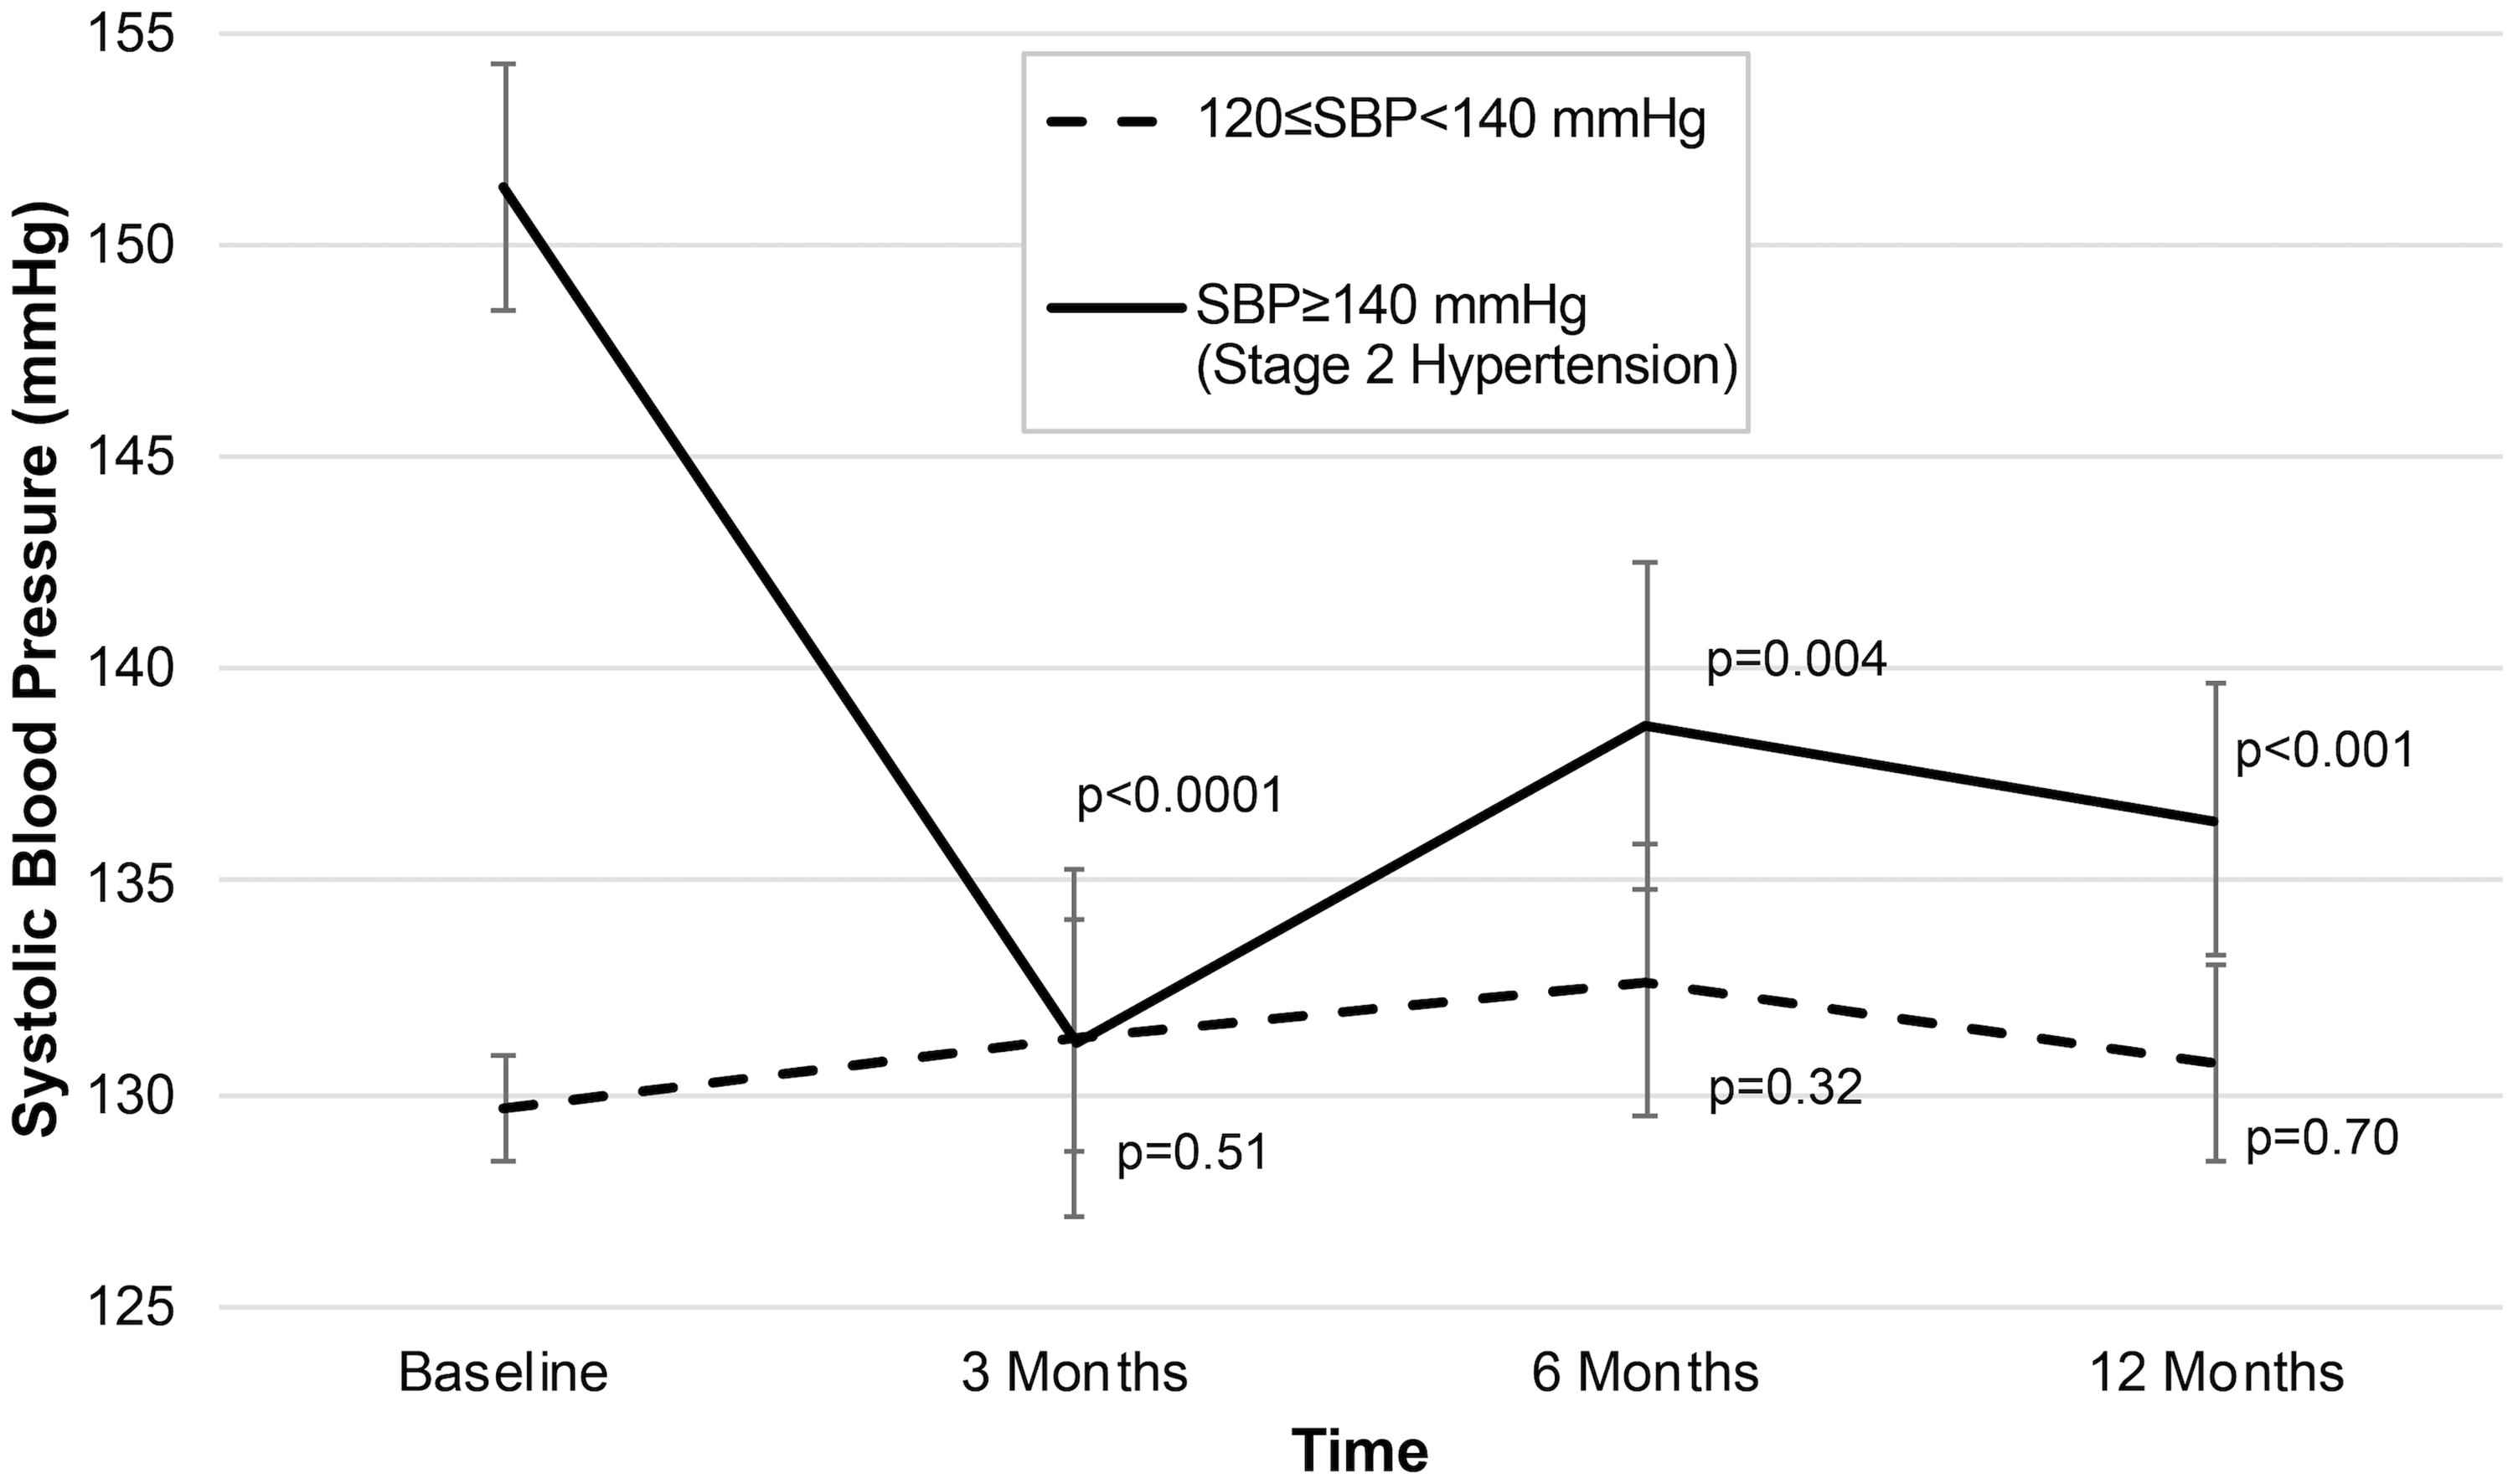 Changes in systolic blood pressure (SBP) from baseline through follow-up after MB-BP intervention